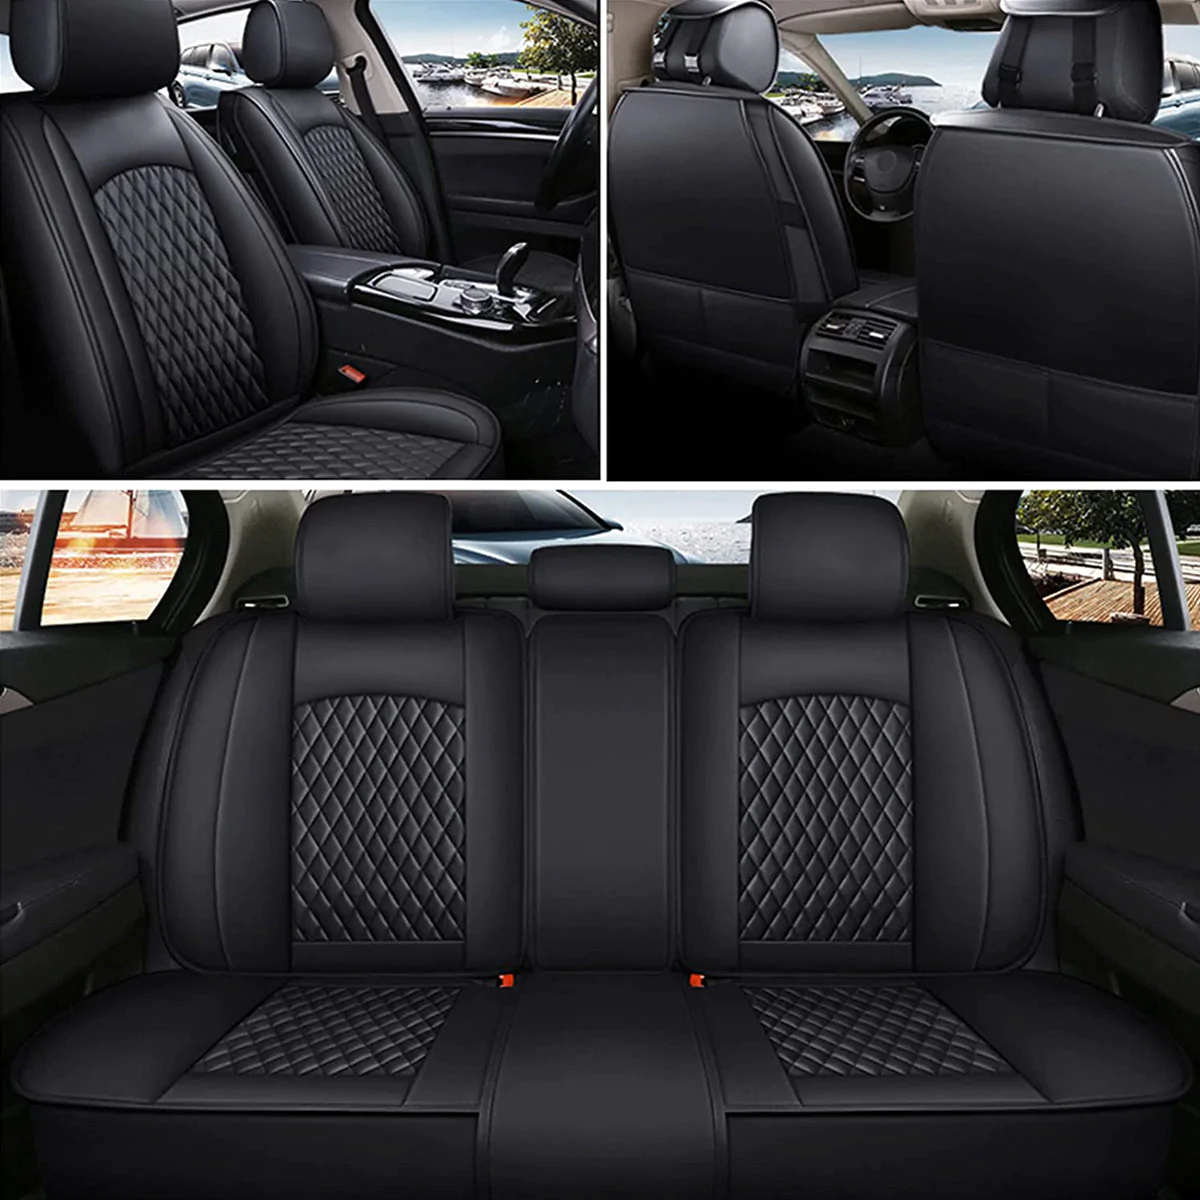 Custom Text For Seat Covers 5 Seats Full Set, Custom Fit For Your Cars, Leatherette Automotive Seat Cushion Protector Universal Fit, Vehicle Auto Interior Decor FT13988